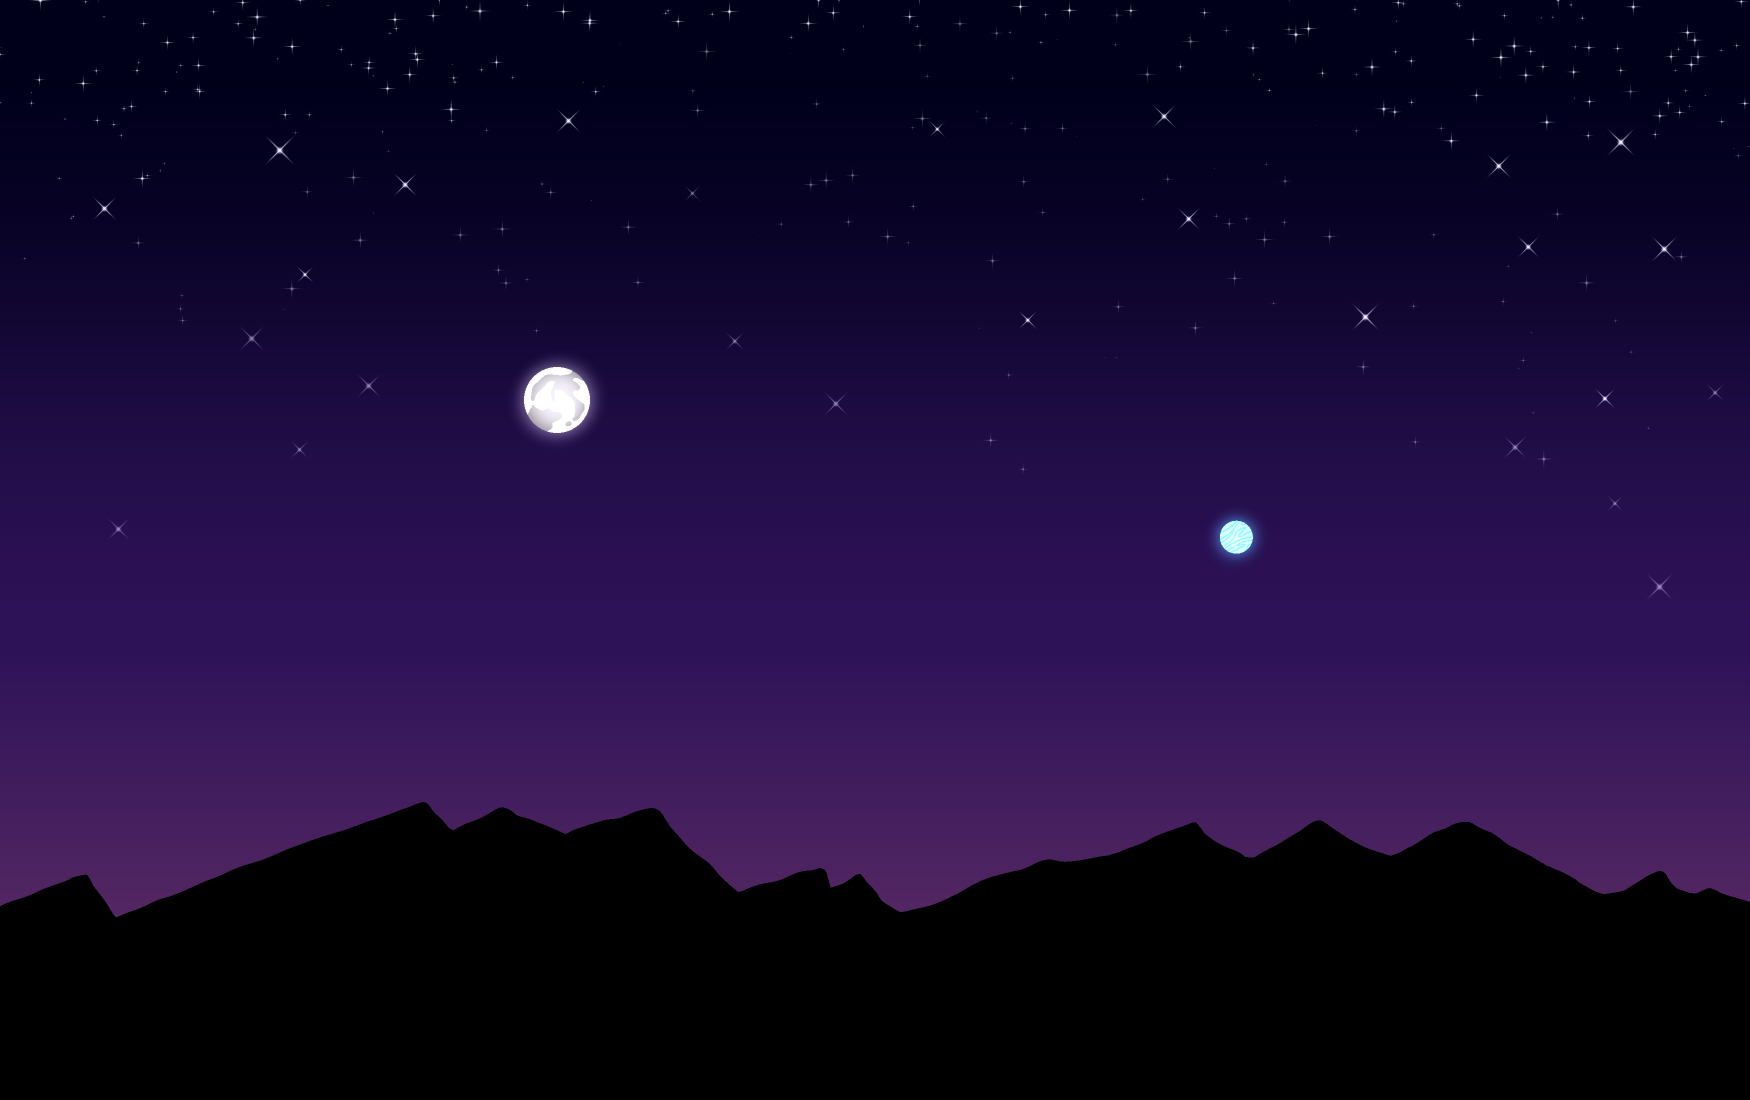 A black mountain range silhouetted against a starry sky with two moons.